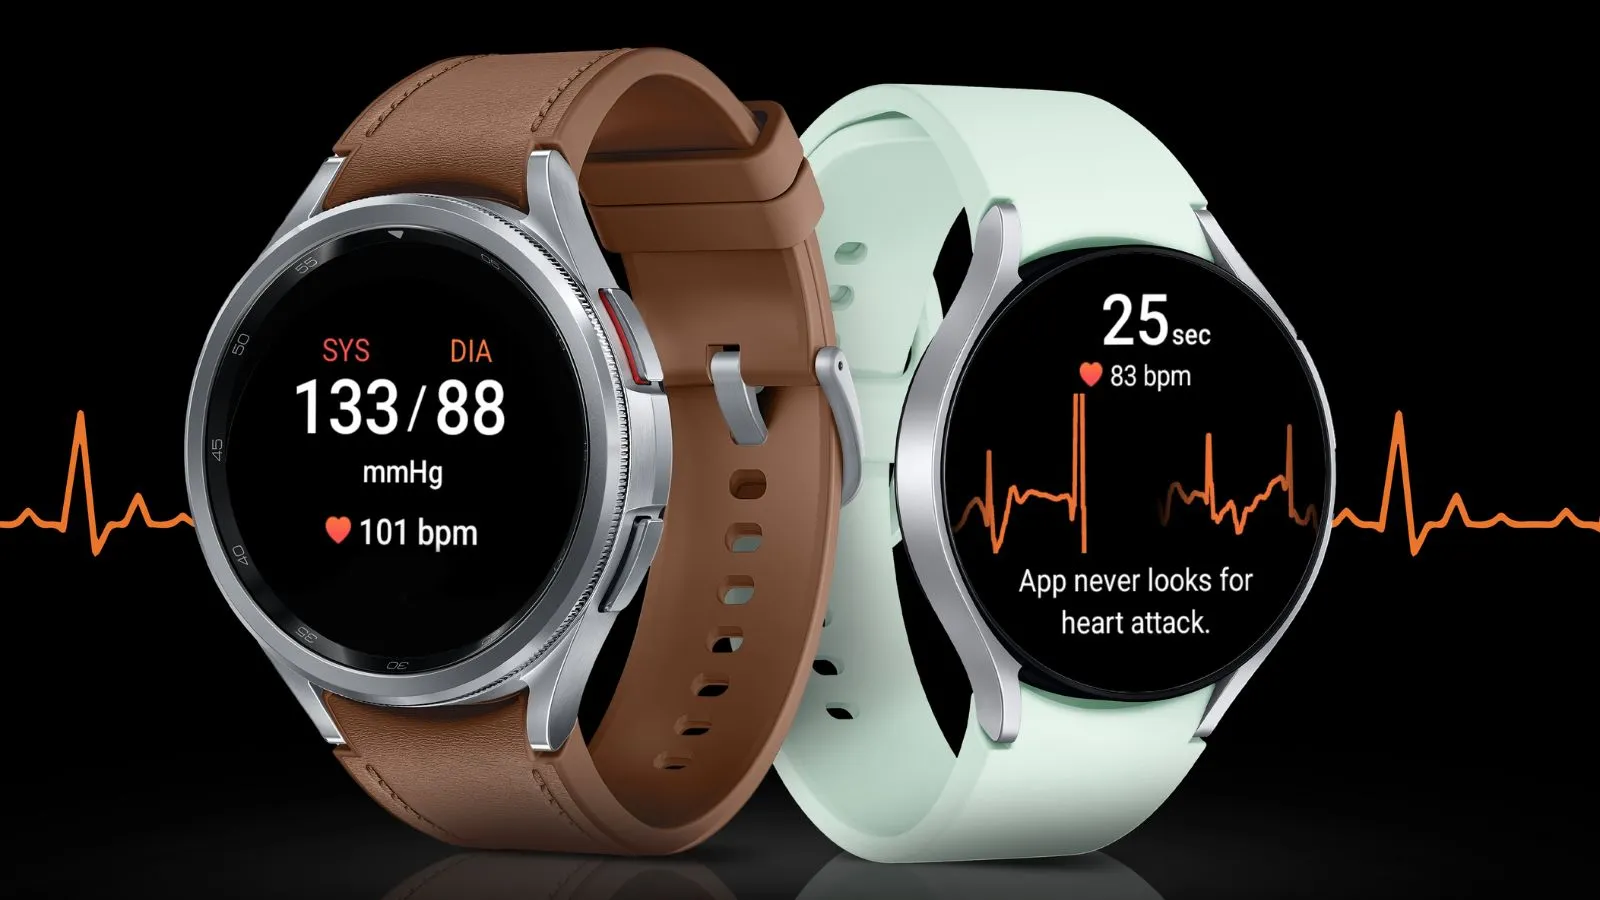 Can The Samsung Galaxy Watch 4 Measure Blood Pressure In The U.S.?